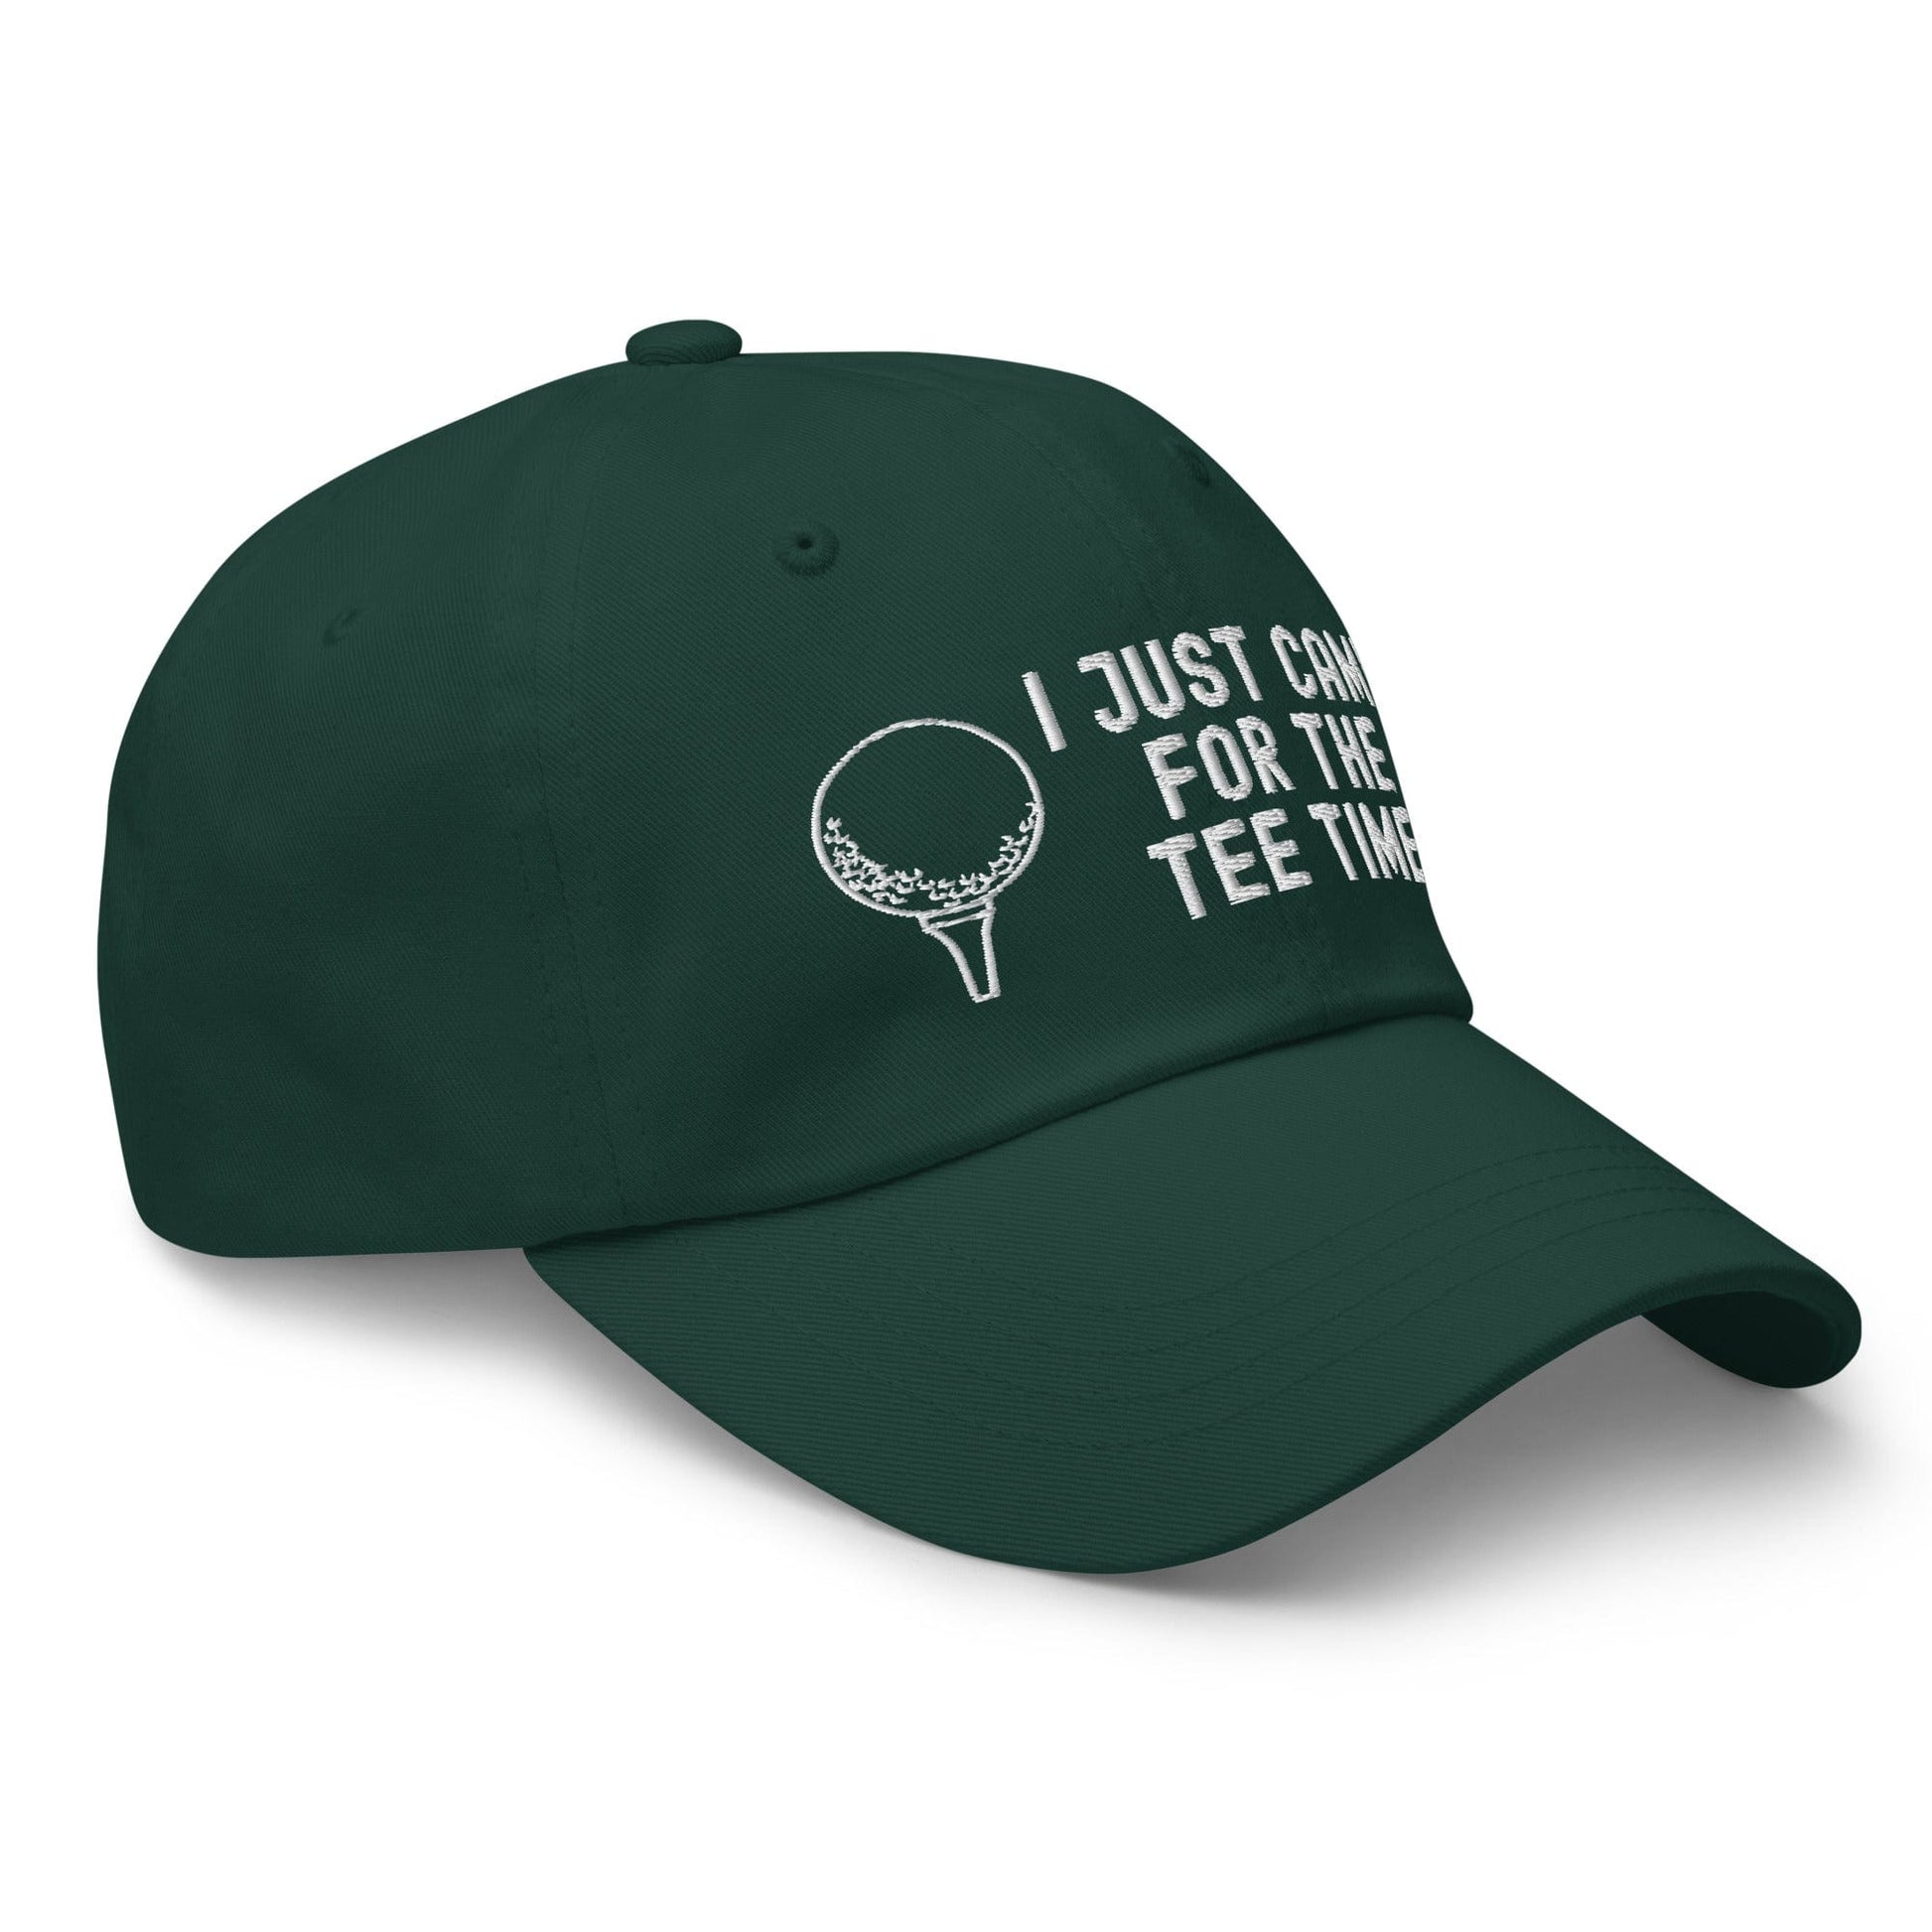 Funny Golfer Gifts  Dad Cap Spruce I Just Came For The Tee Times Cap